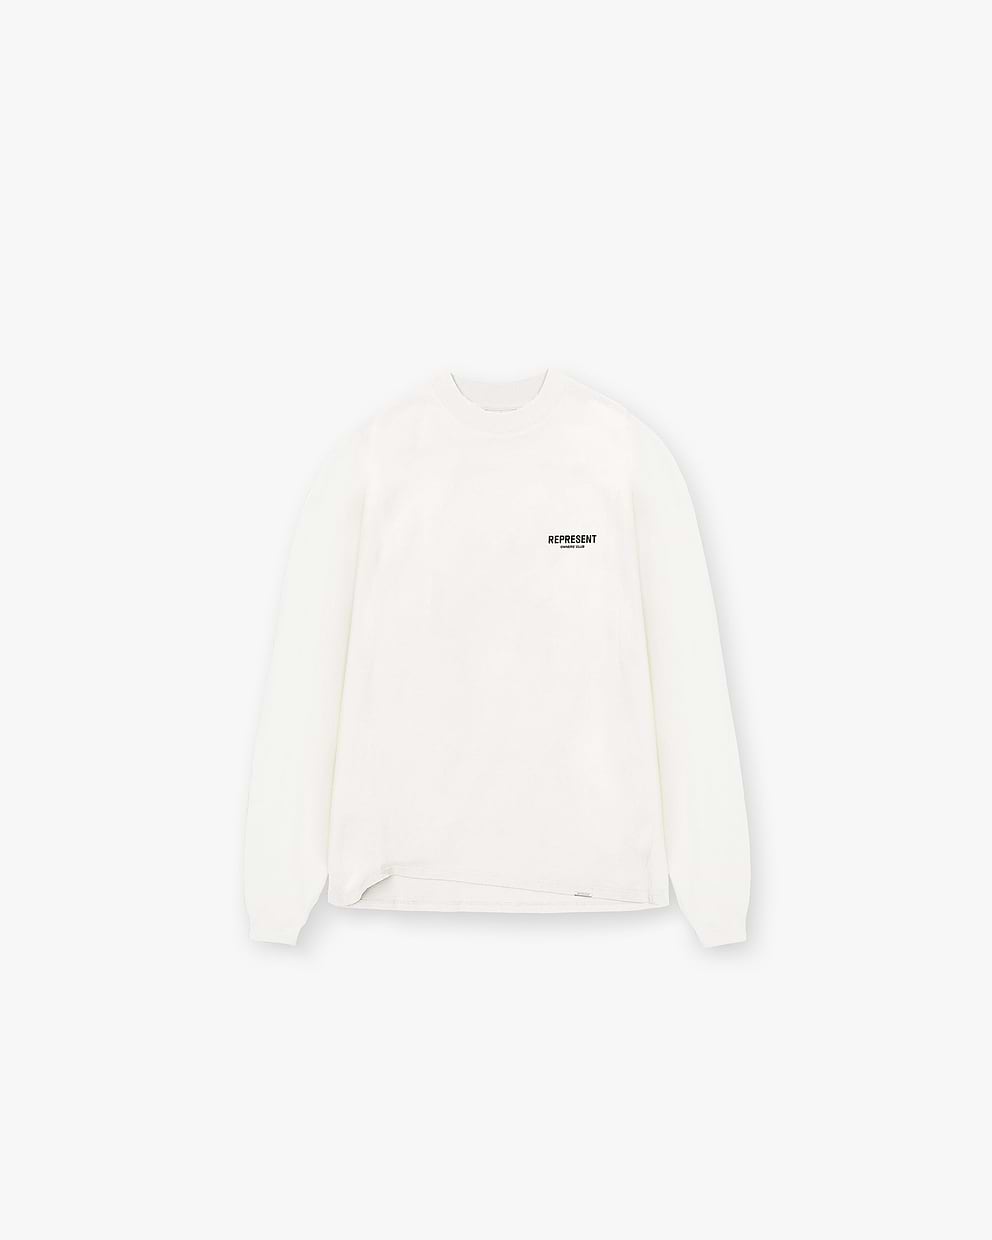 Owners' Club Long Sleeve T-Shirt | Flat White | REPRESENT CLO